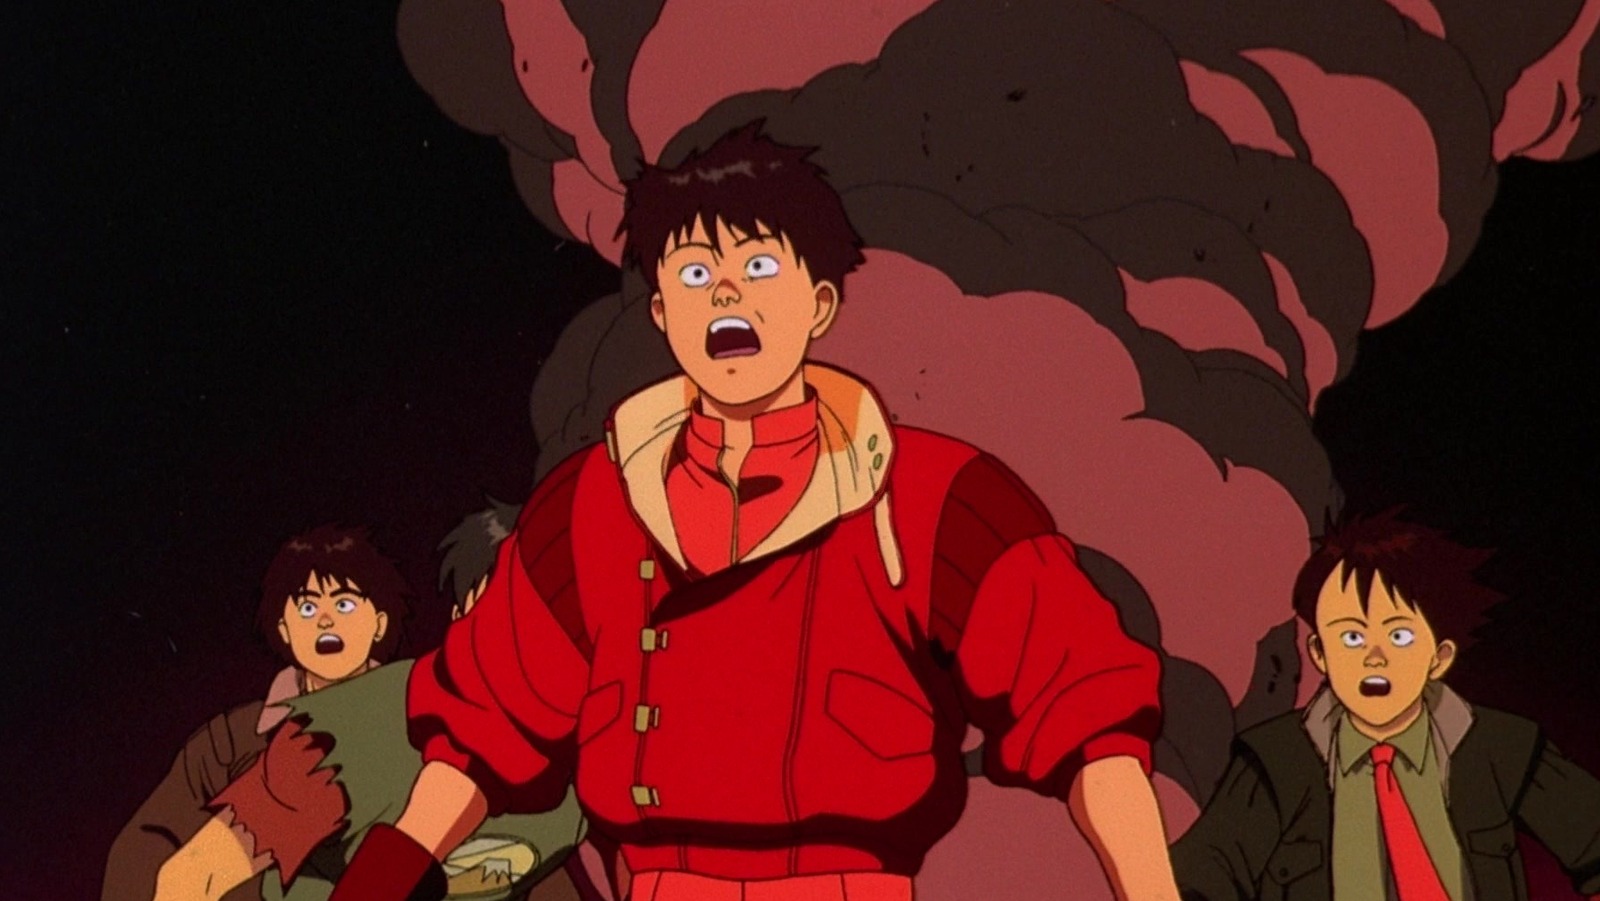 Small Details You May Have Missed In Akira